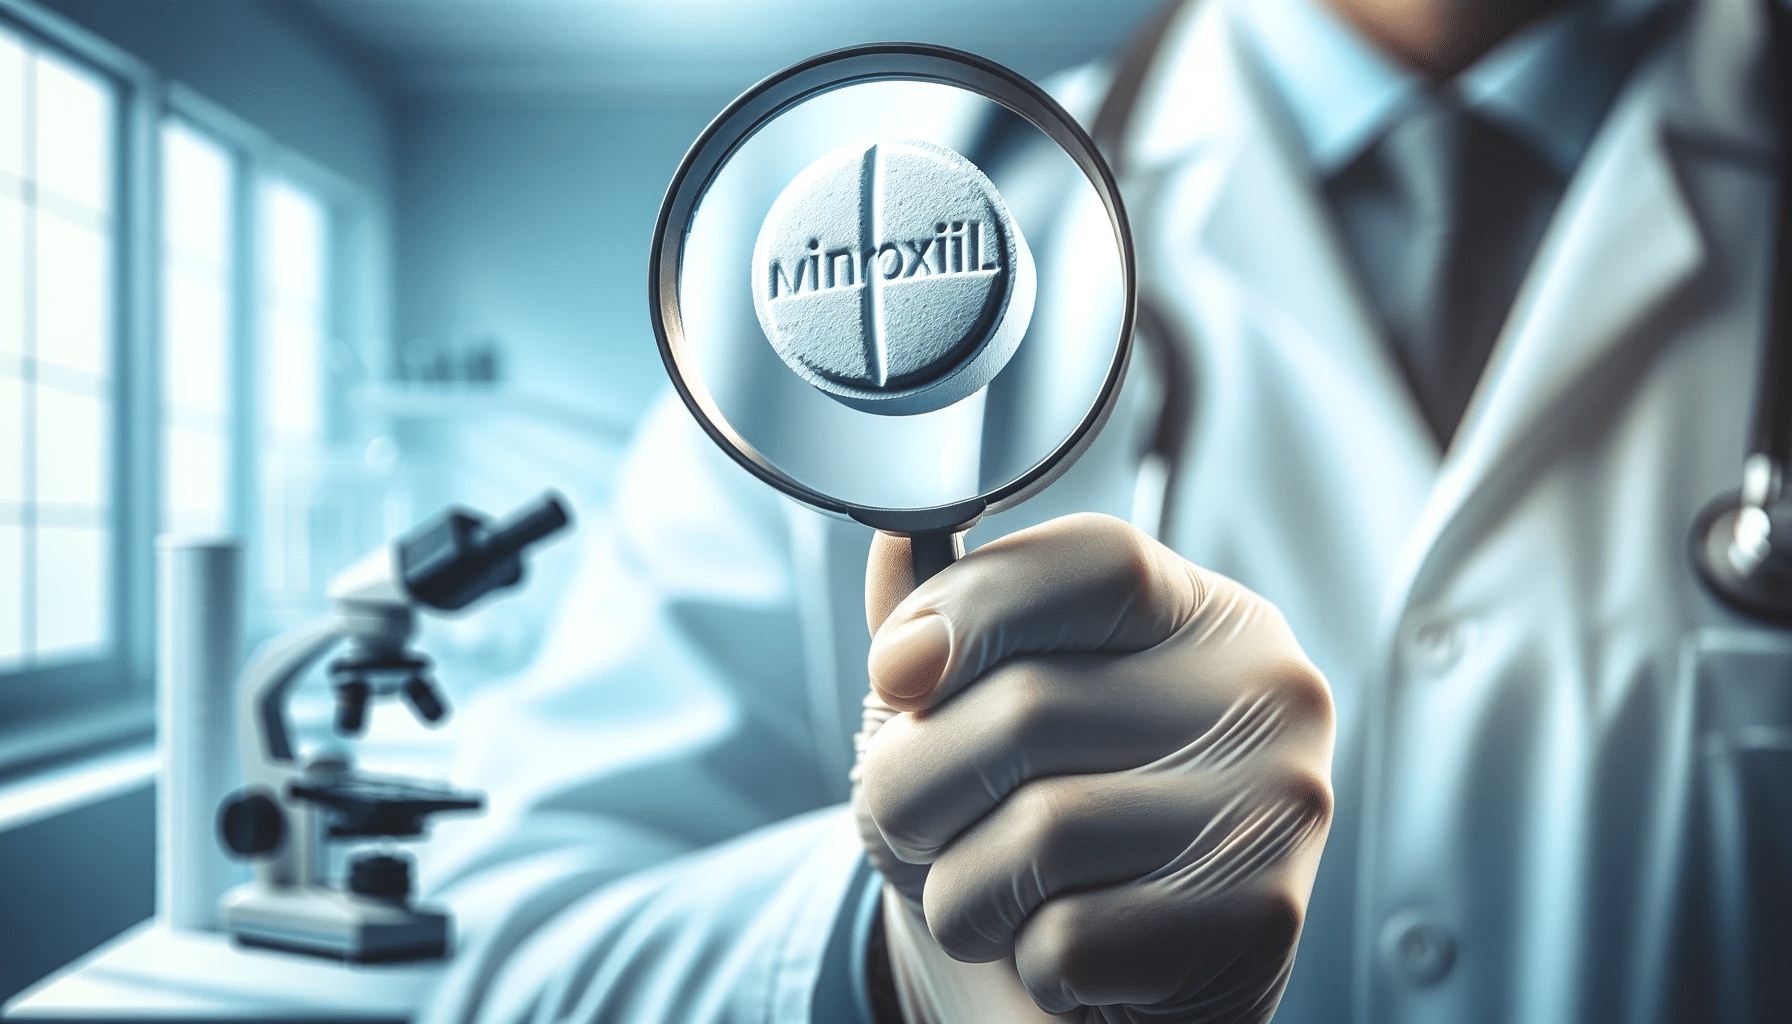 DALL·E 2023 11 29 10.39.56 Close up horizontal photo of a doctors hand holding a MINOXIDIL pill under a magnifying glass focusing on the intricate details of the pill. The